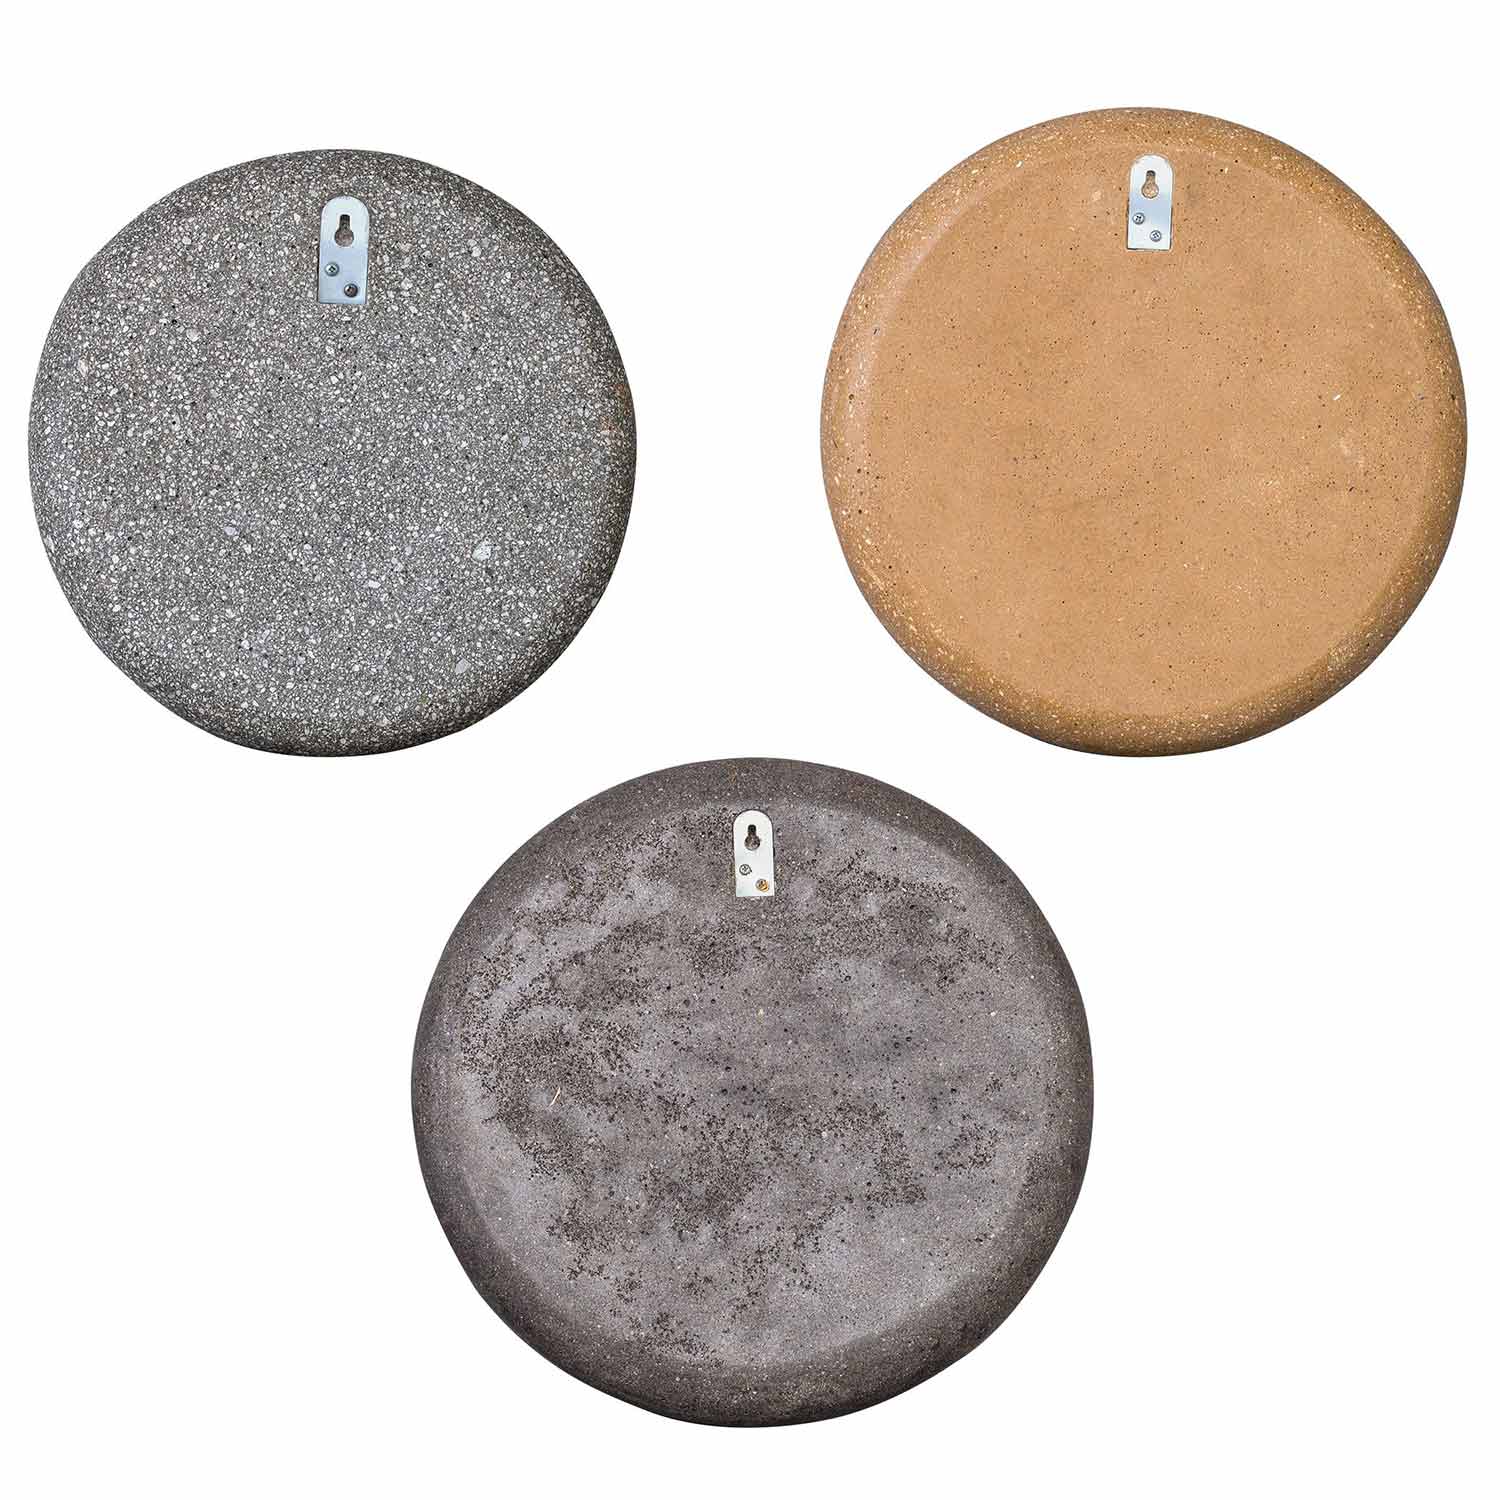 Uttermost Gaia Stone Plate Wall Decor - Set of 3